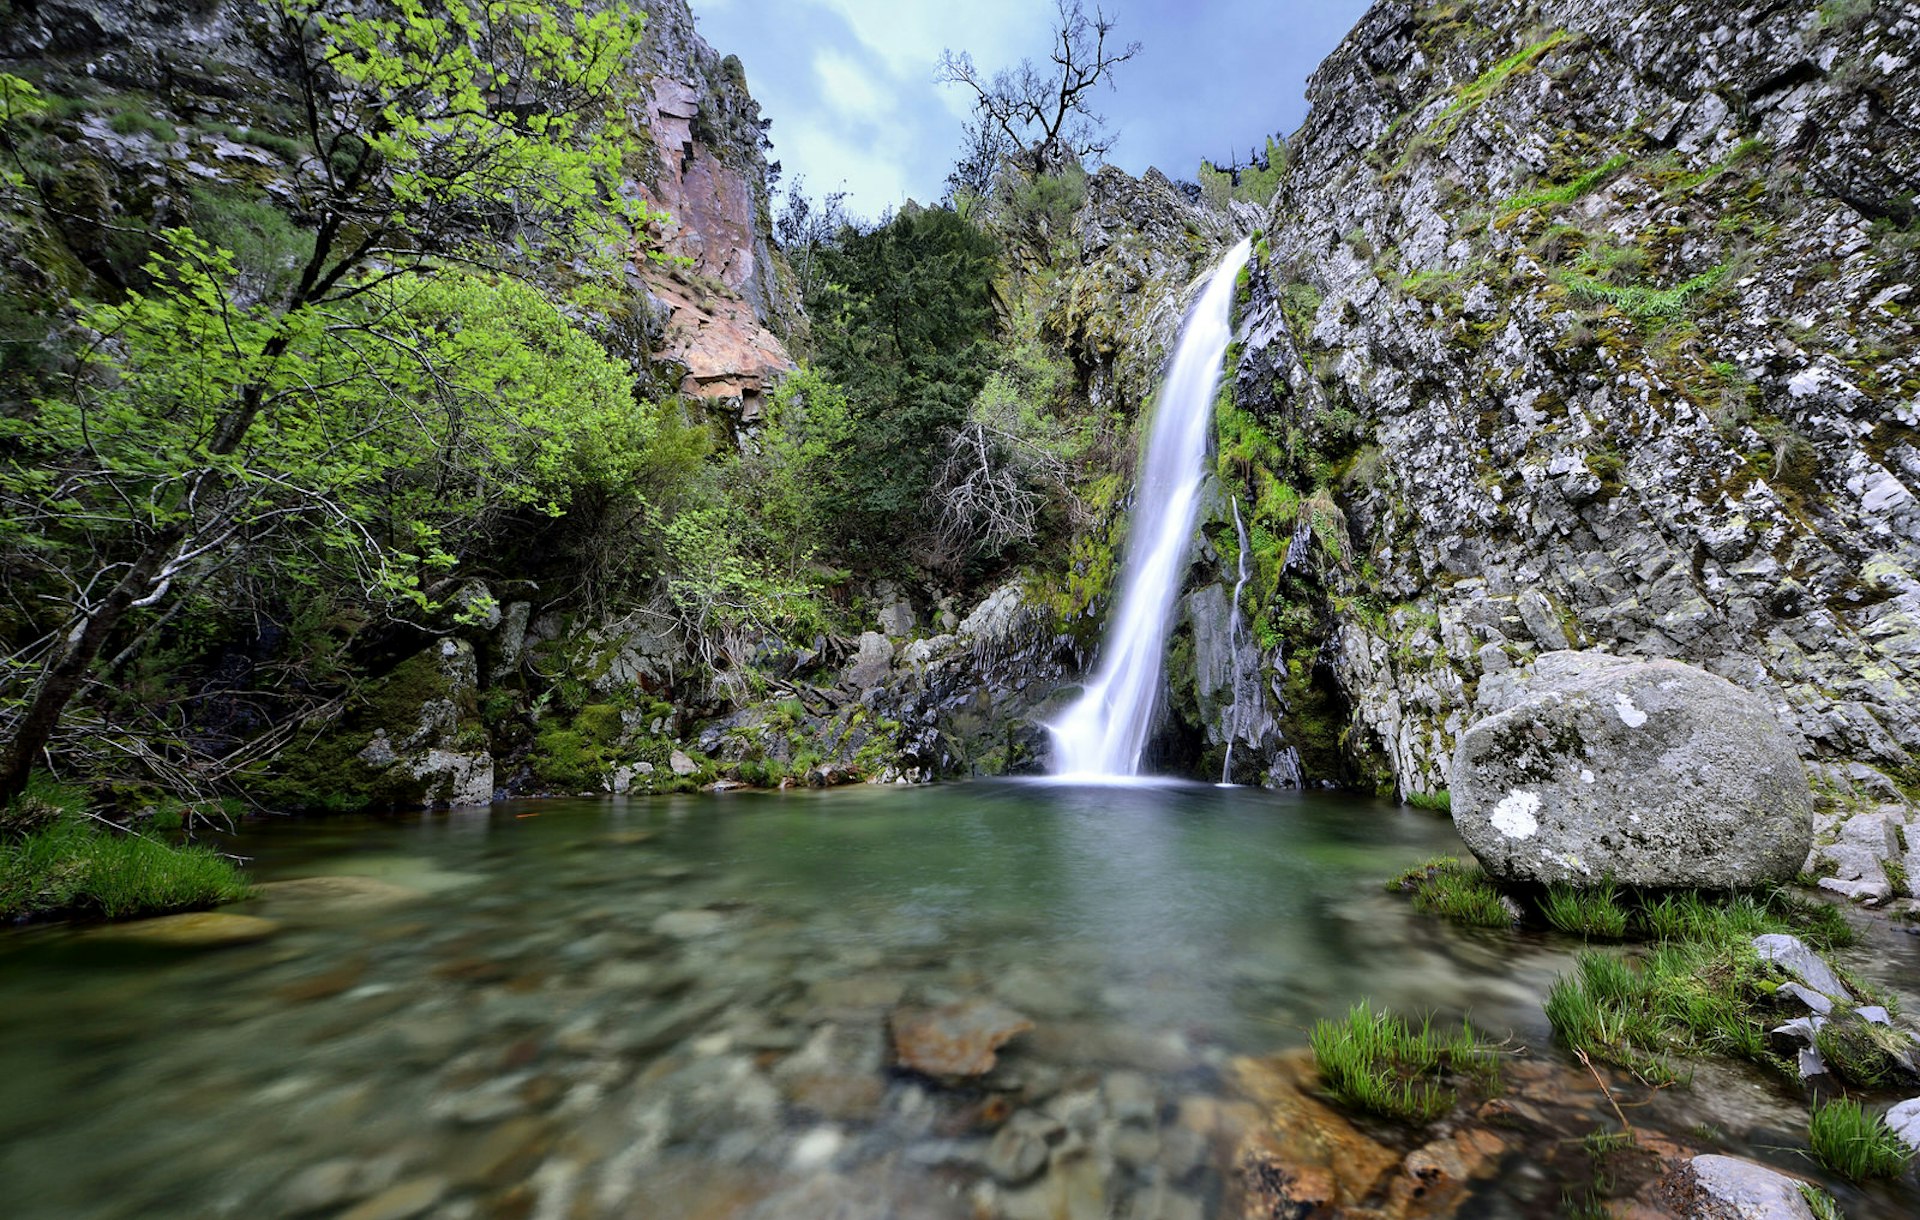 You can explore the lovely scenery at Poço do Inferno on the Trilhos Verdes trail network